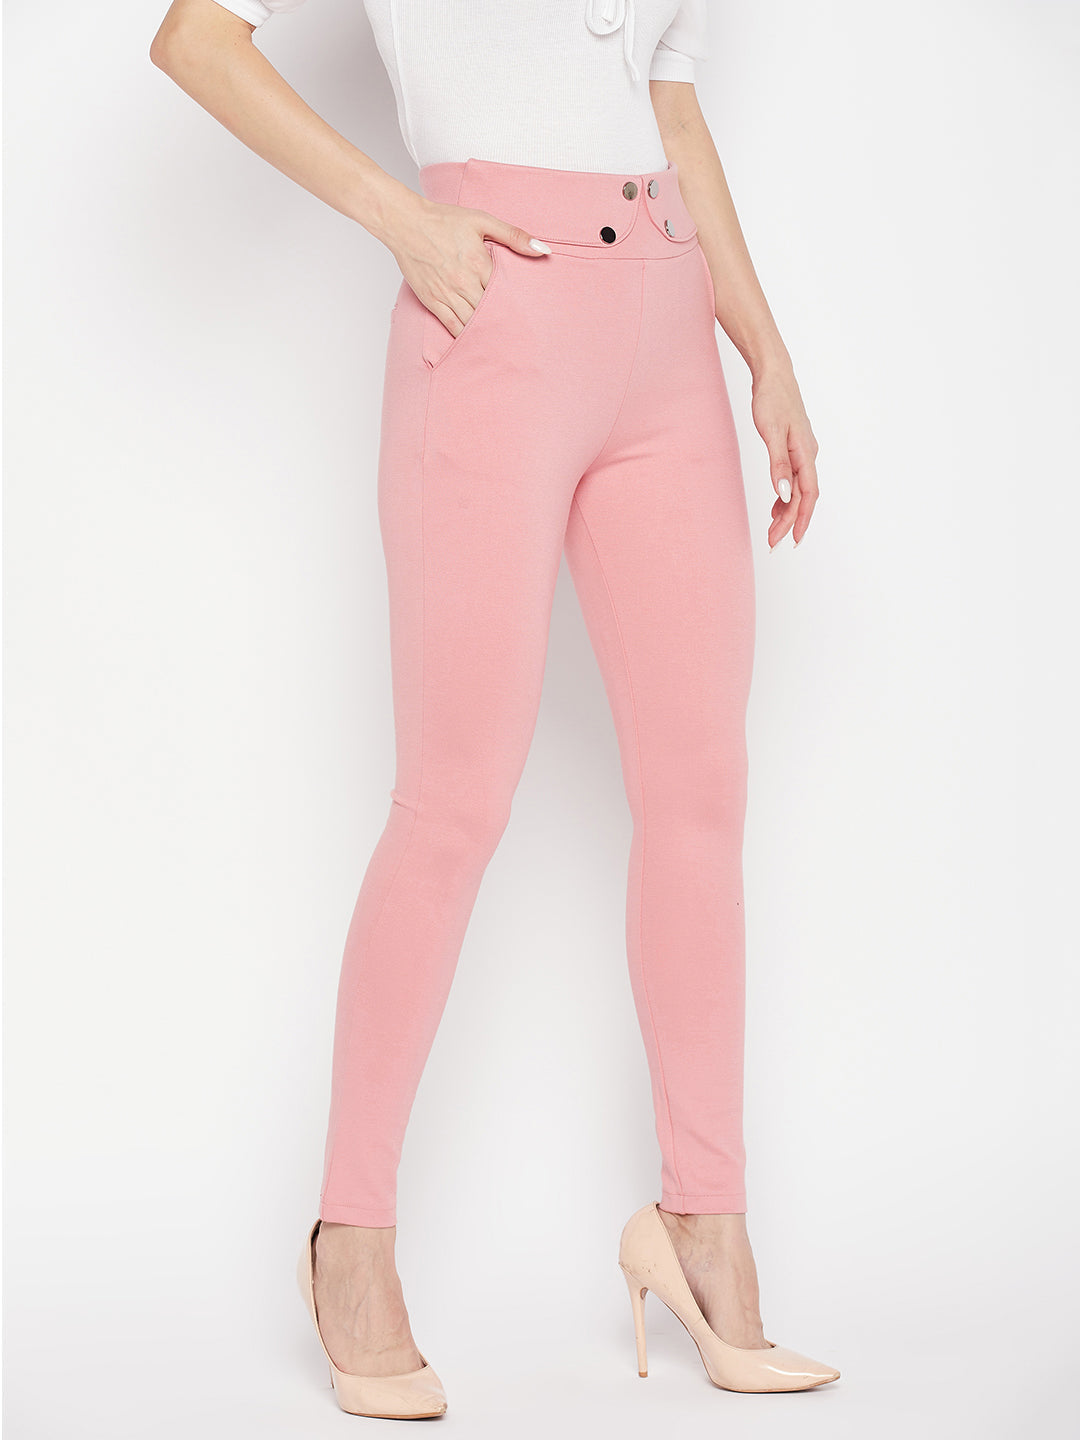 Clora Pink Solid Relaxed Fit Jeggings